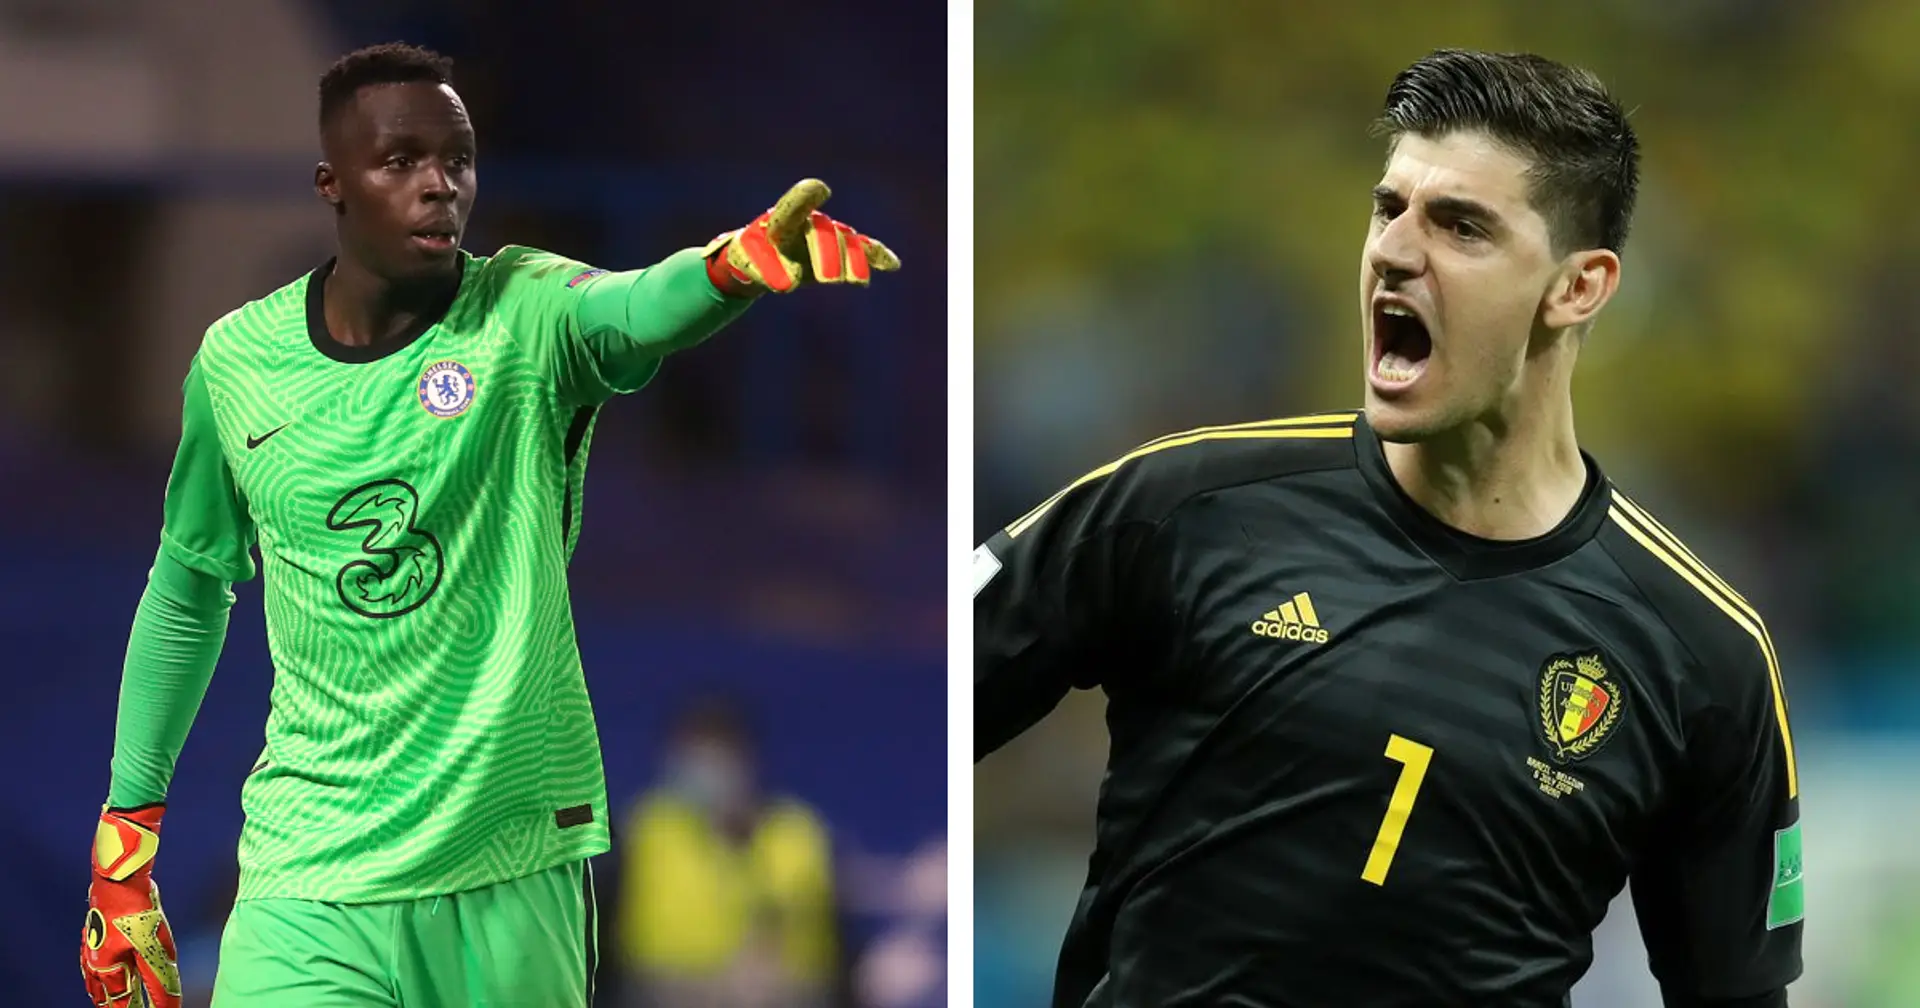 World's top 10 goalkeepers revealed - Edouard Mendy and Thibaut Courtois included